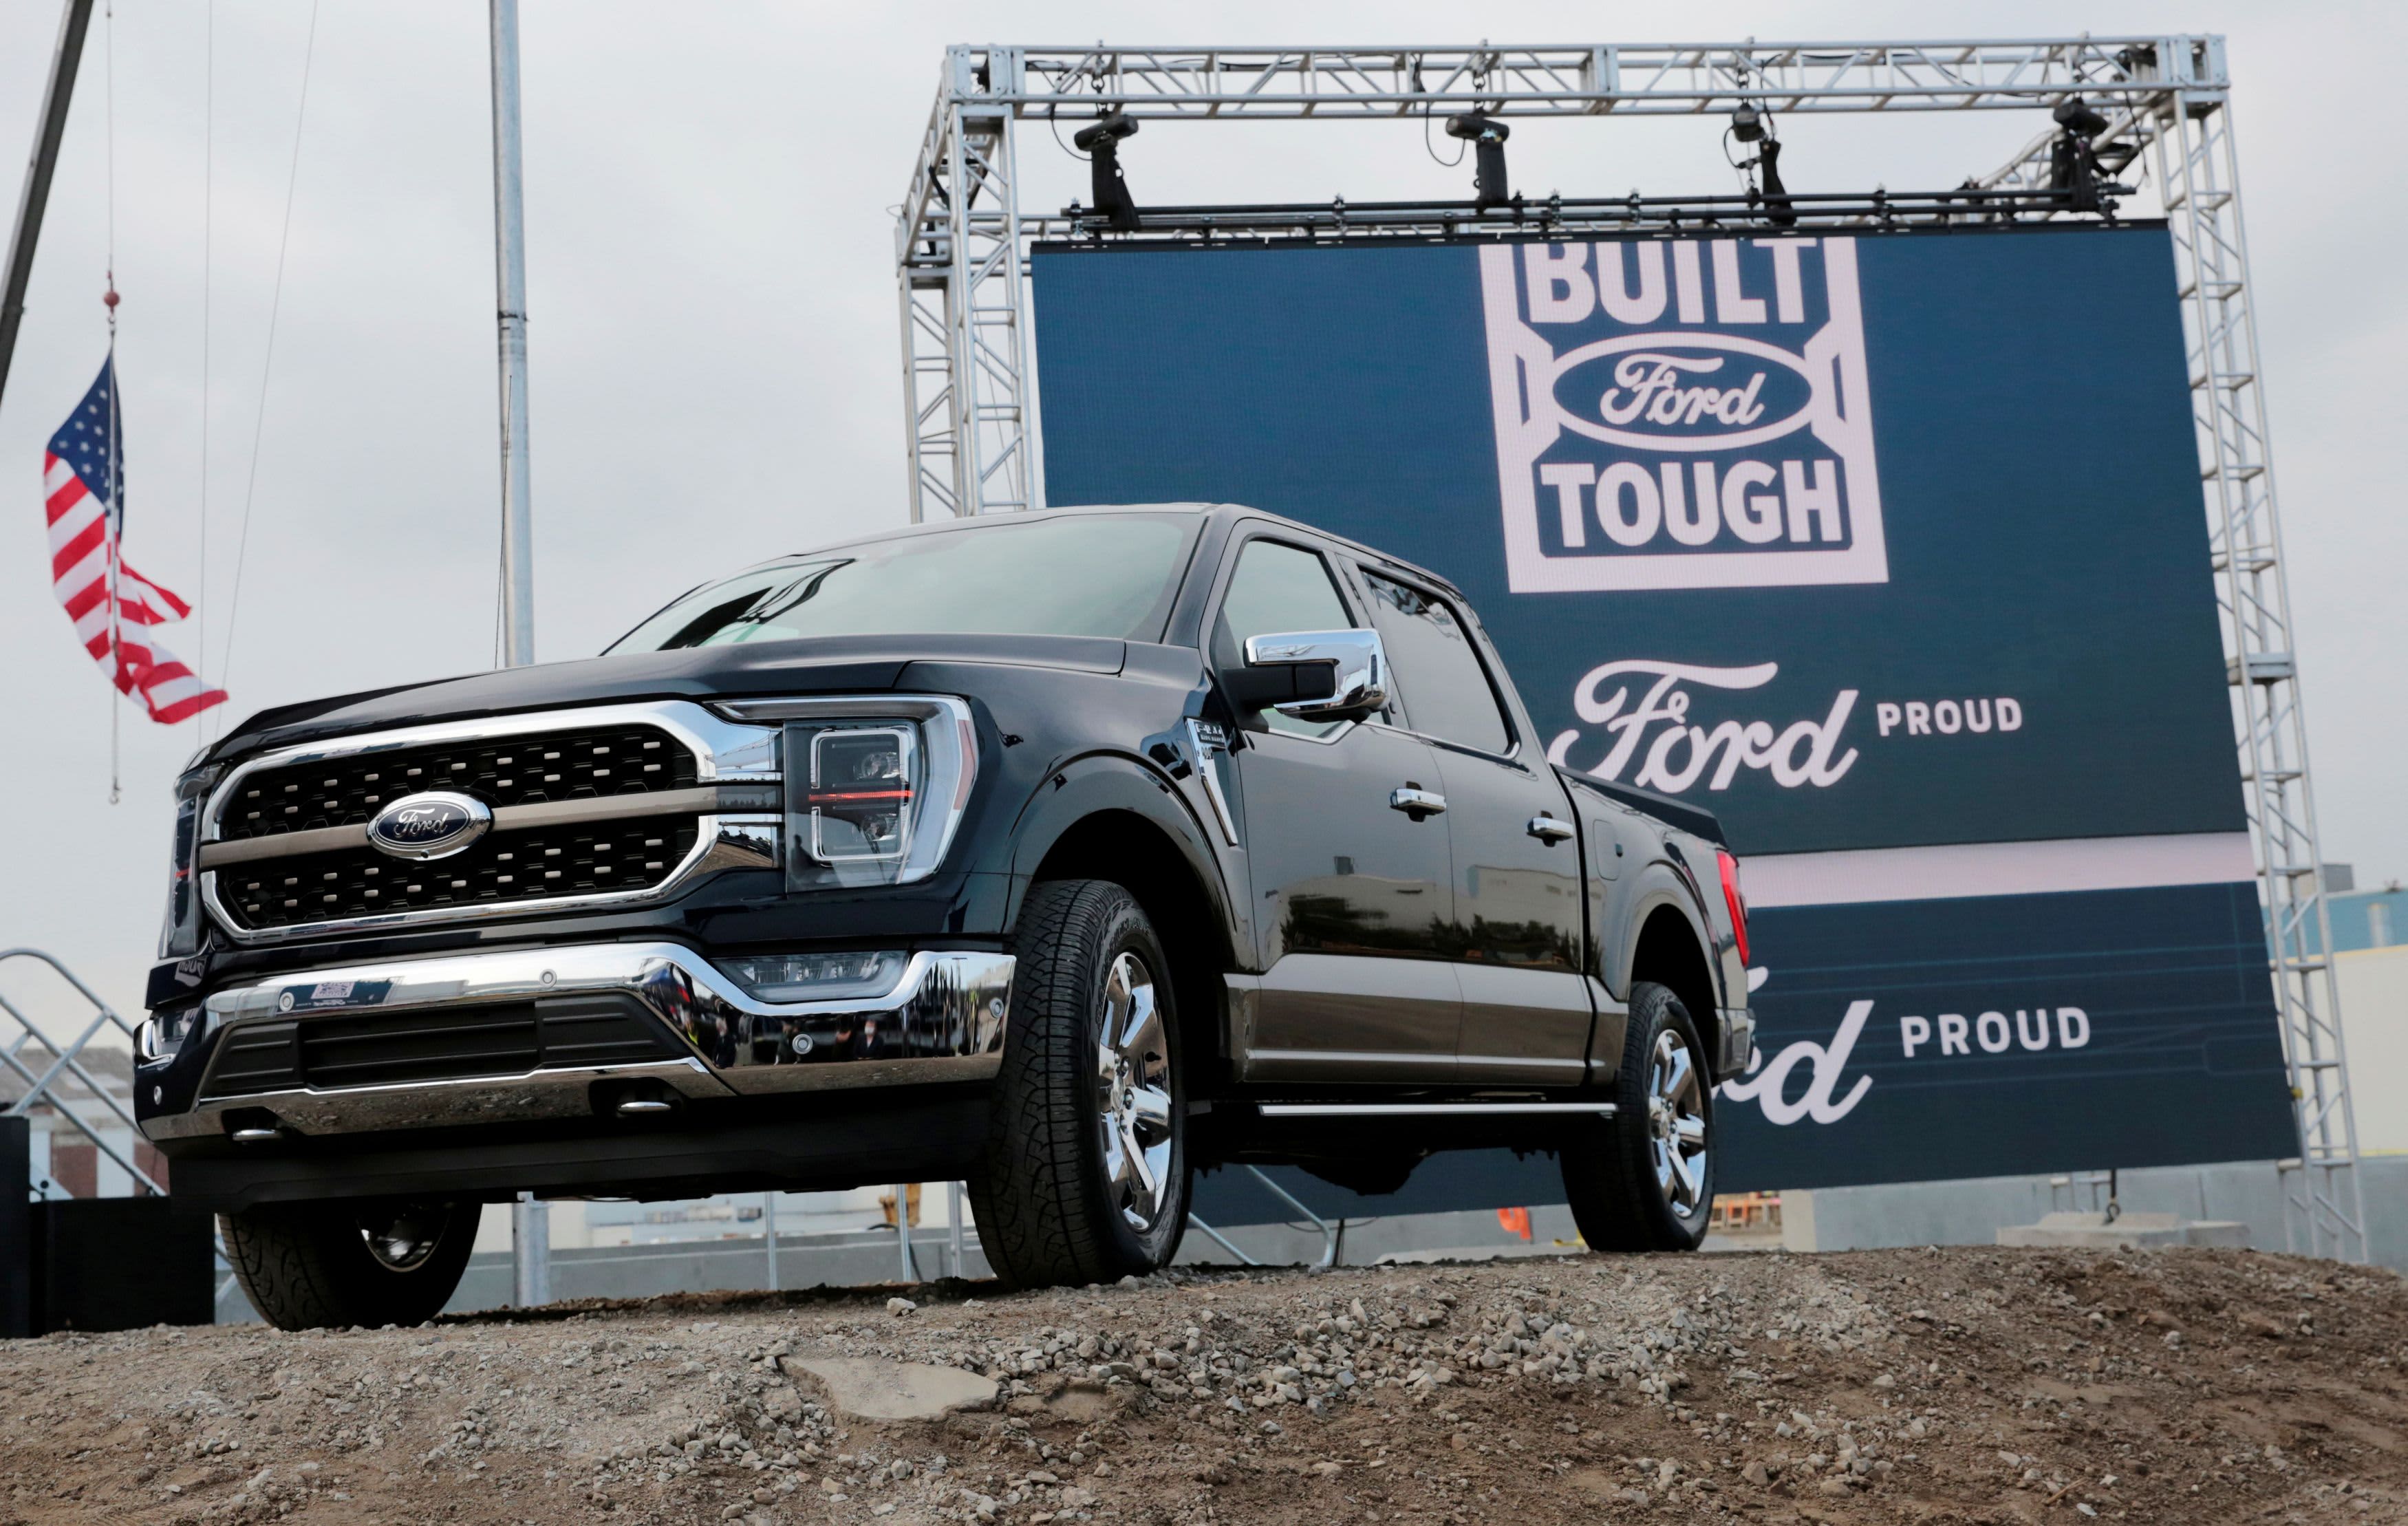 Ford cutting shifts, partially building F-150s due to chip shortage